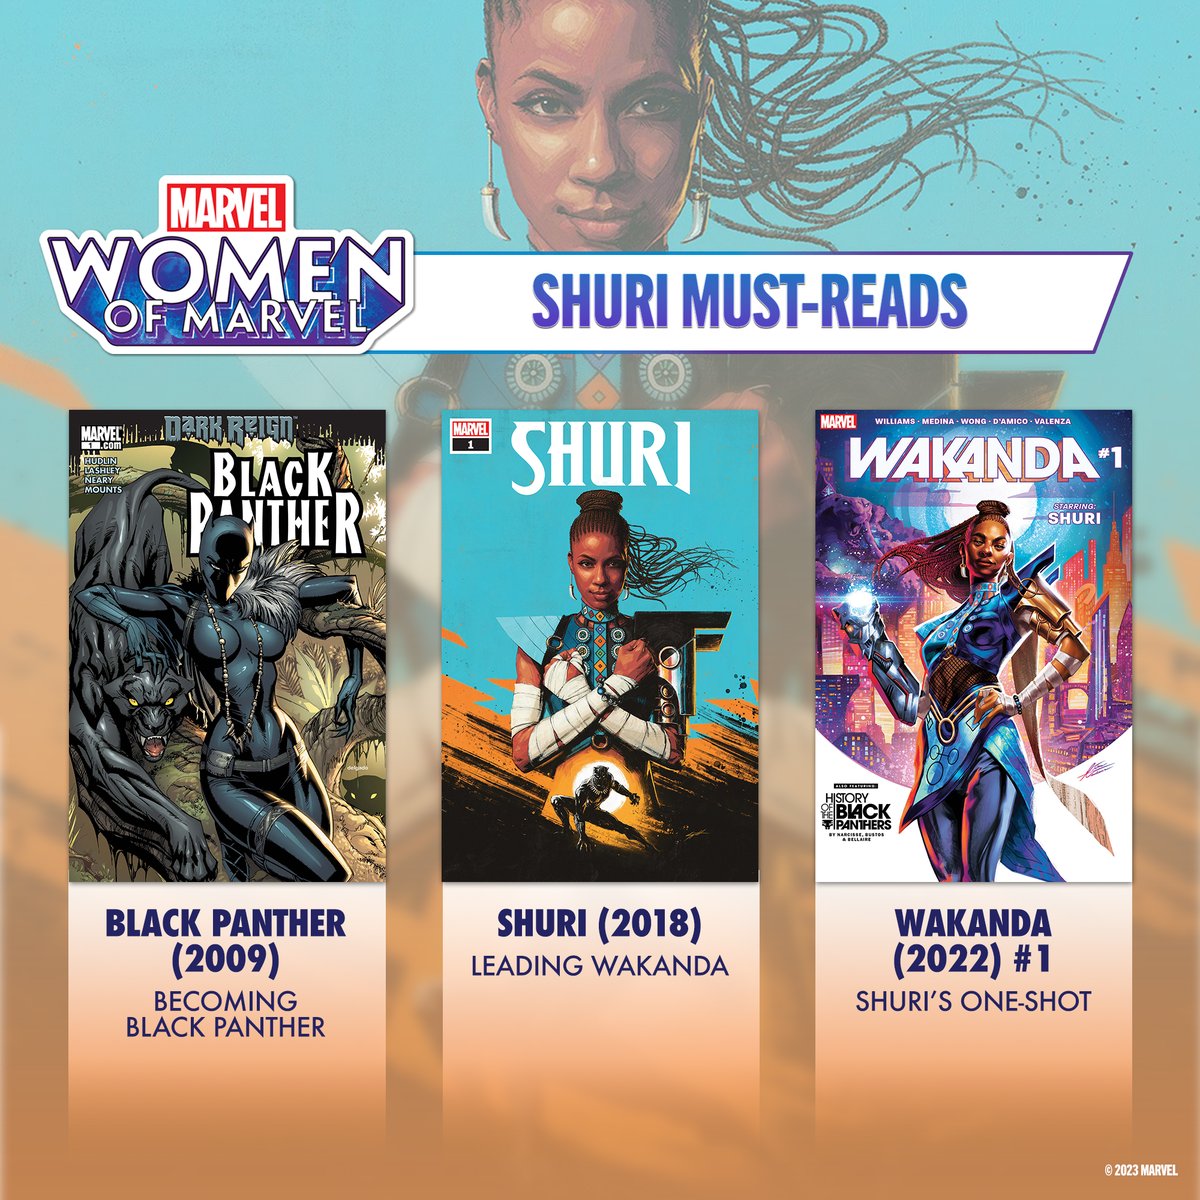 Princess, scientific genius, and even Black Panther herself. Get to know Shuri with a few must-read #MarvelComics and take a deep dive into the character on the latest #WomenOfMarvel podcast episode. 🎧 Listen now: bit.ly/3PByKb3